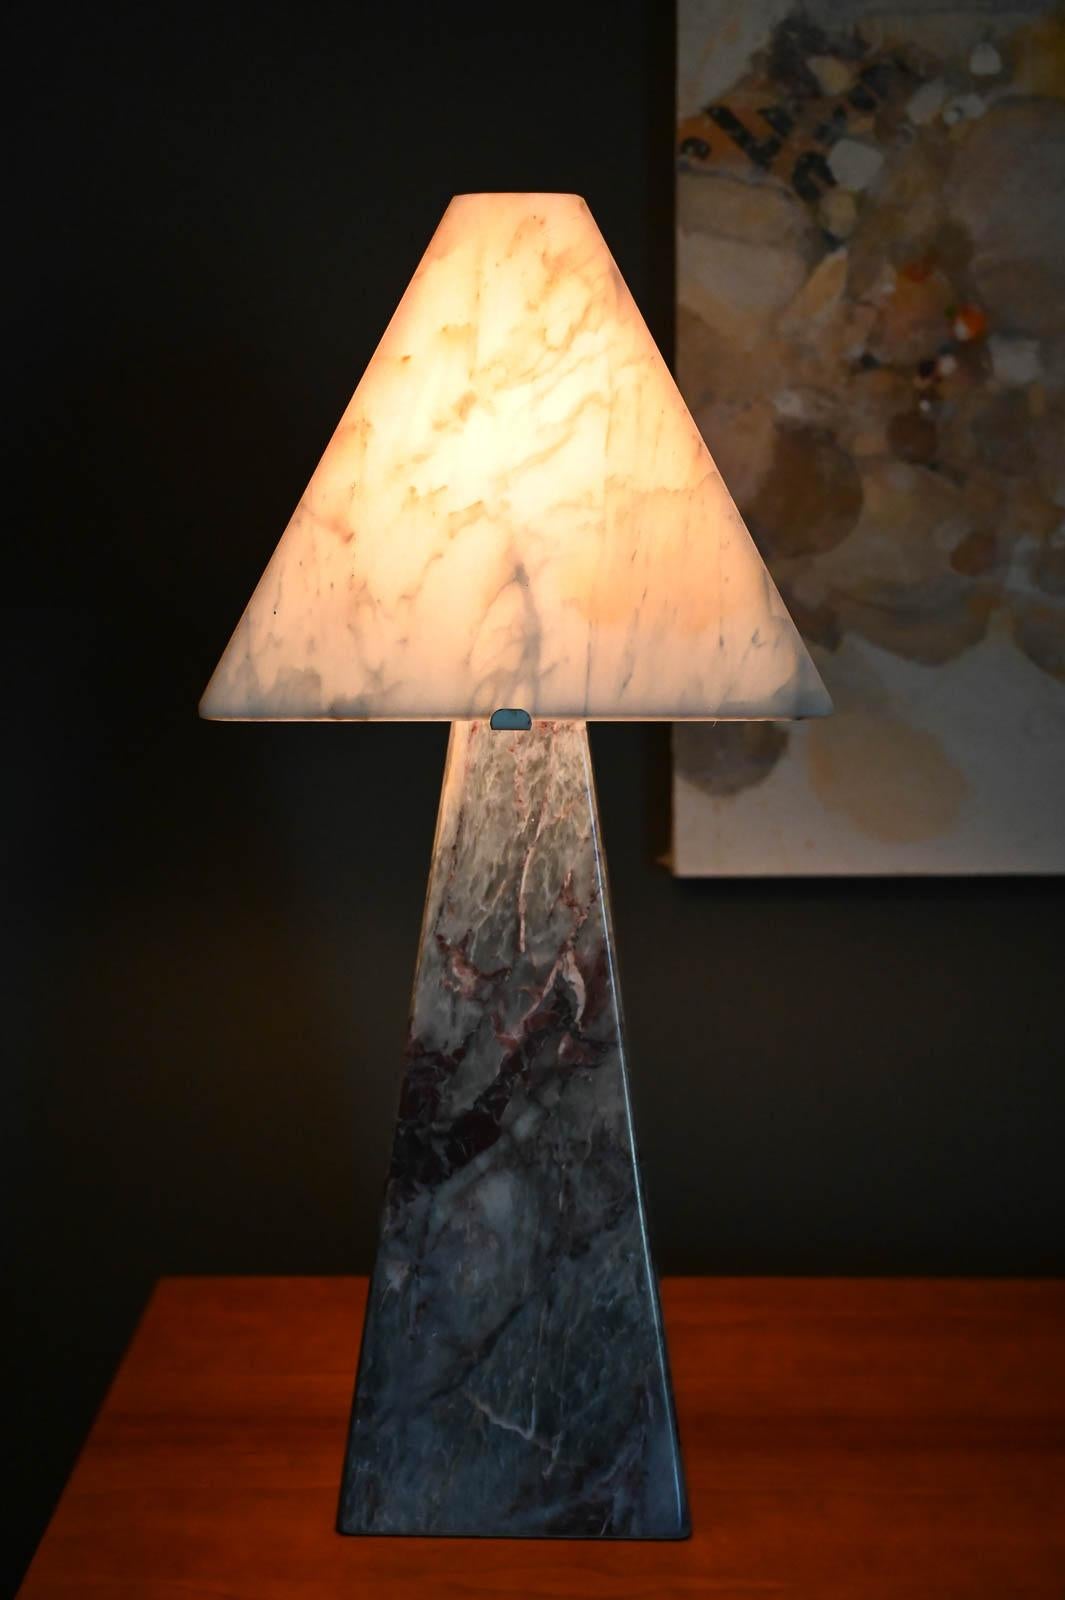 Cristalino Salome Marble Columnar table lamp with Alabaster Shade, circa 1970. In the style of Cini Boeri, this beautiful marble table lamp comes with the original Alabaster shade in excellent condition. Shade is 12